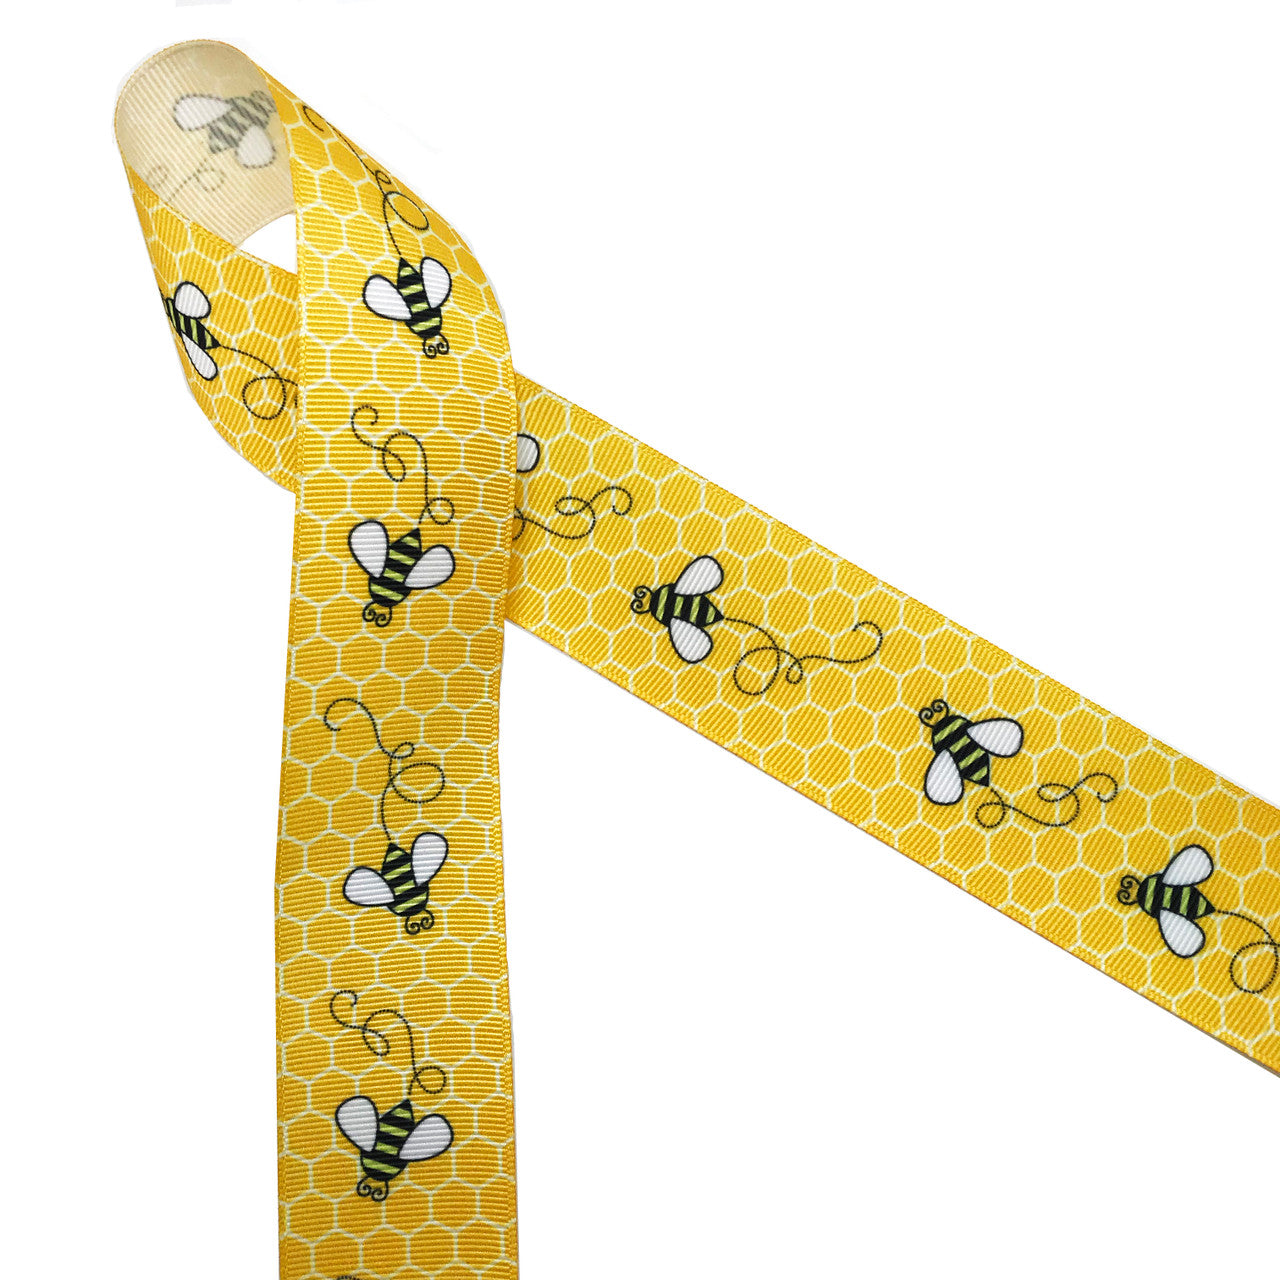 Buzzing bees in black and white printed on a yellow honeycomb background printed on 1.5" grosgrain ribbon is the perfect ribbon for hair bows, fascinators, craft projects, sewing projects and gifting! Be sure to have this adorable ribbon on hand for all your creative ideas!